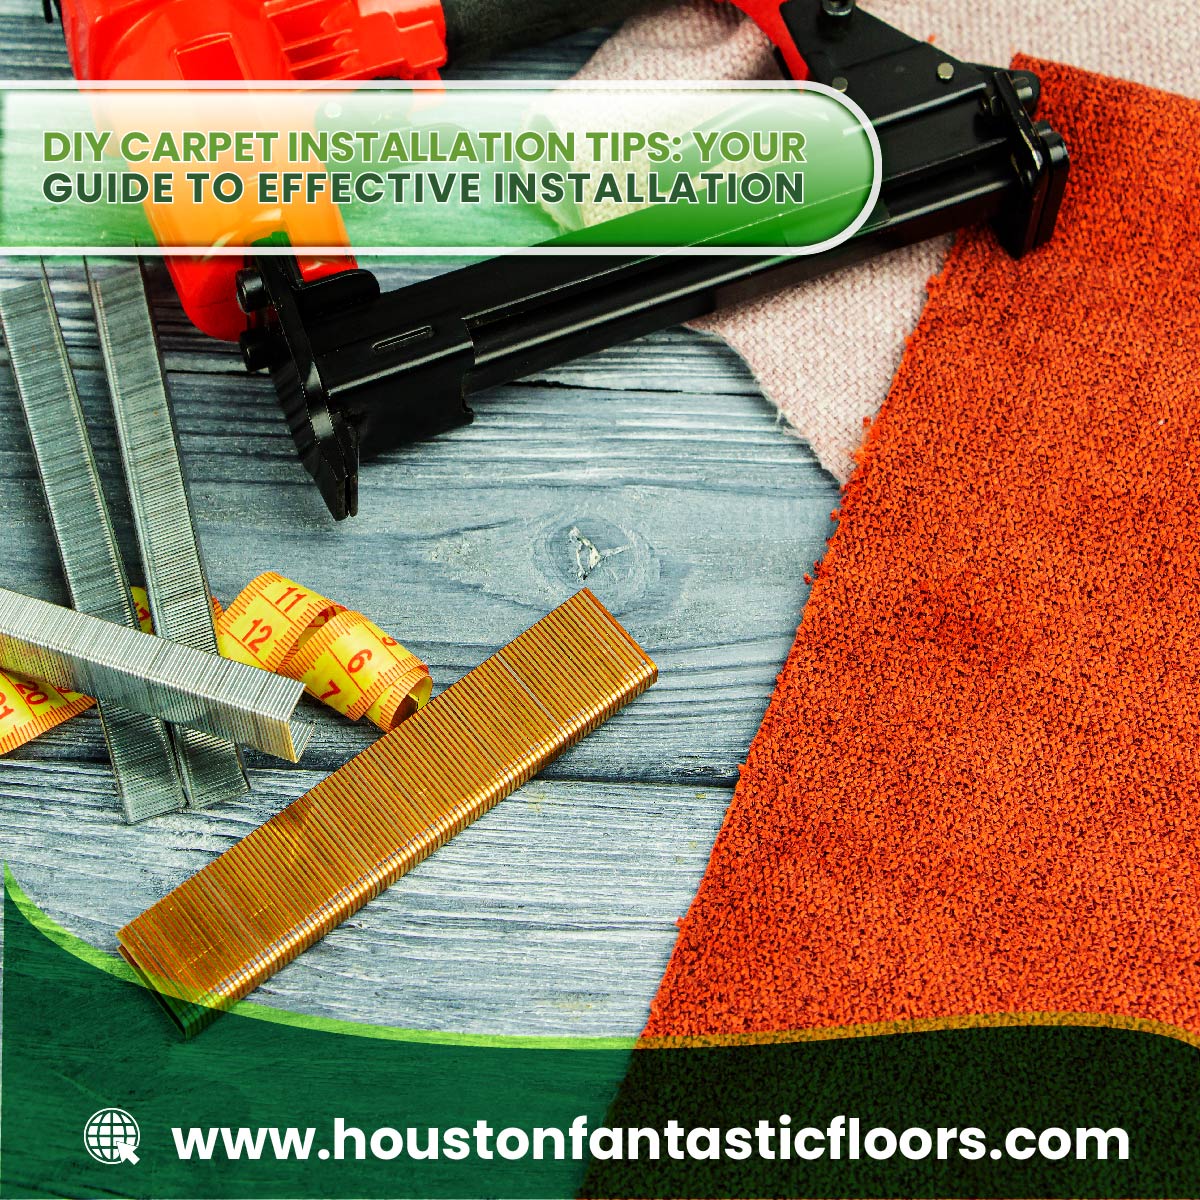 DIY Carpet Installation Tips: Your Guide to Effective Installation